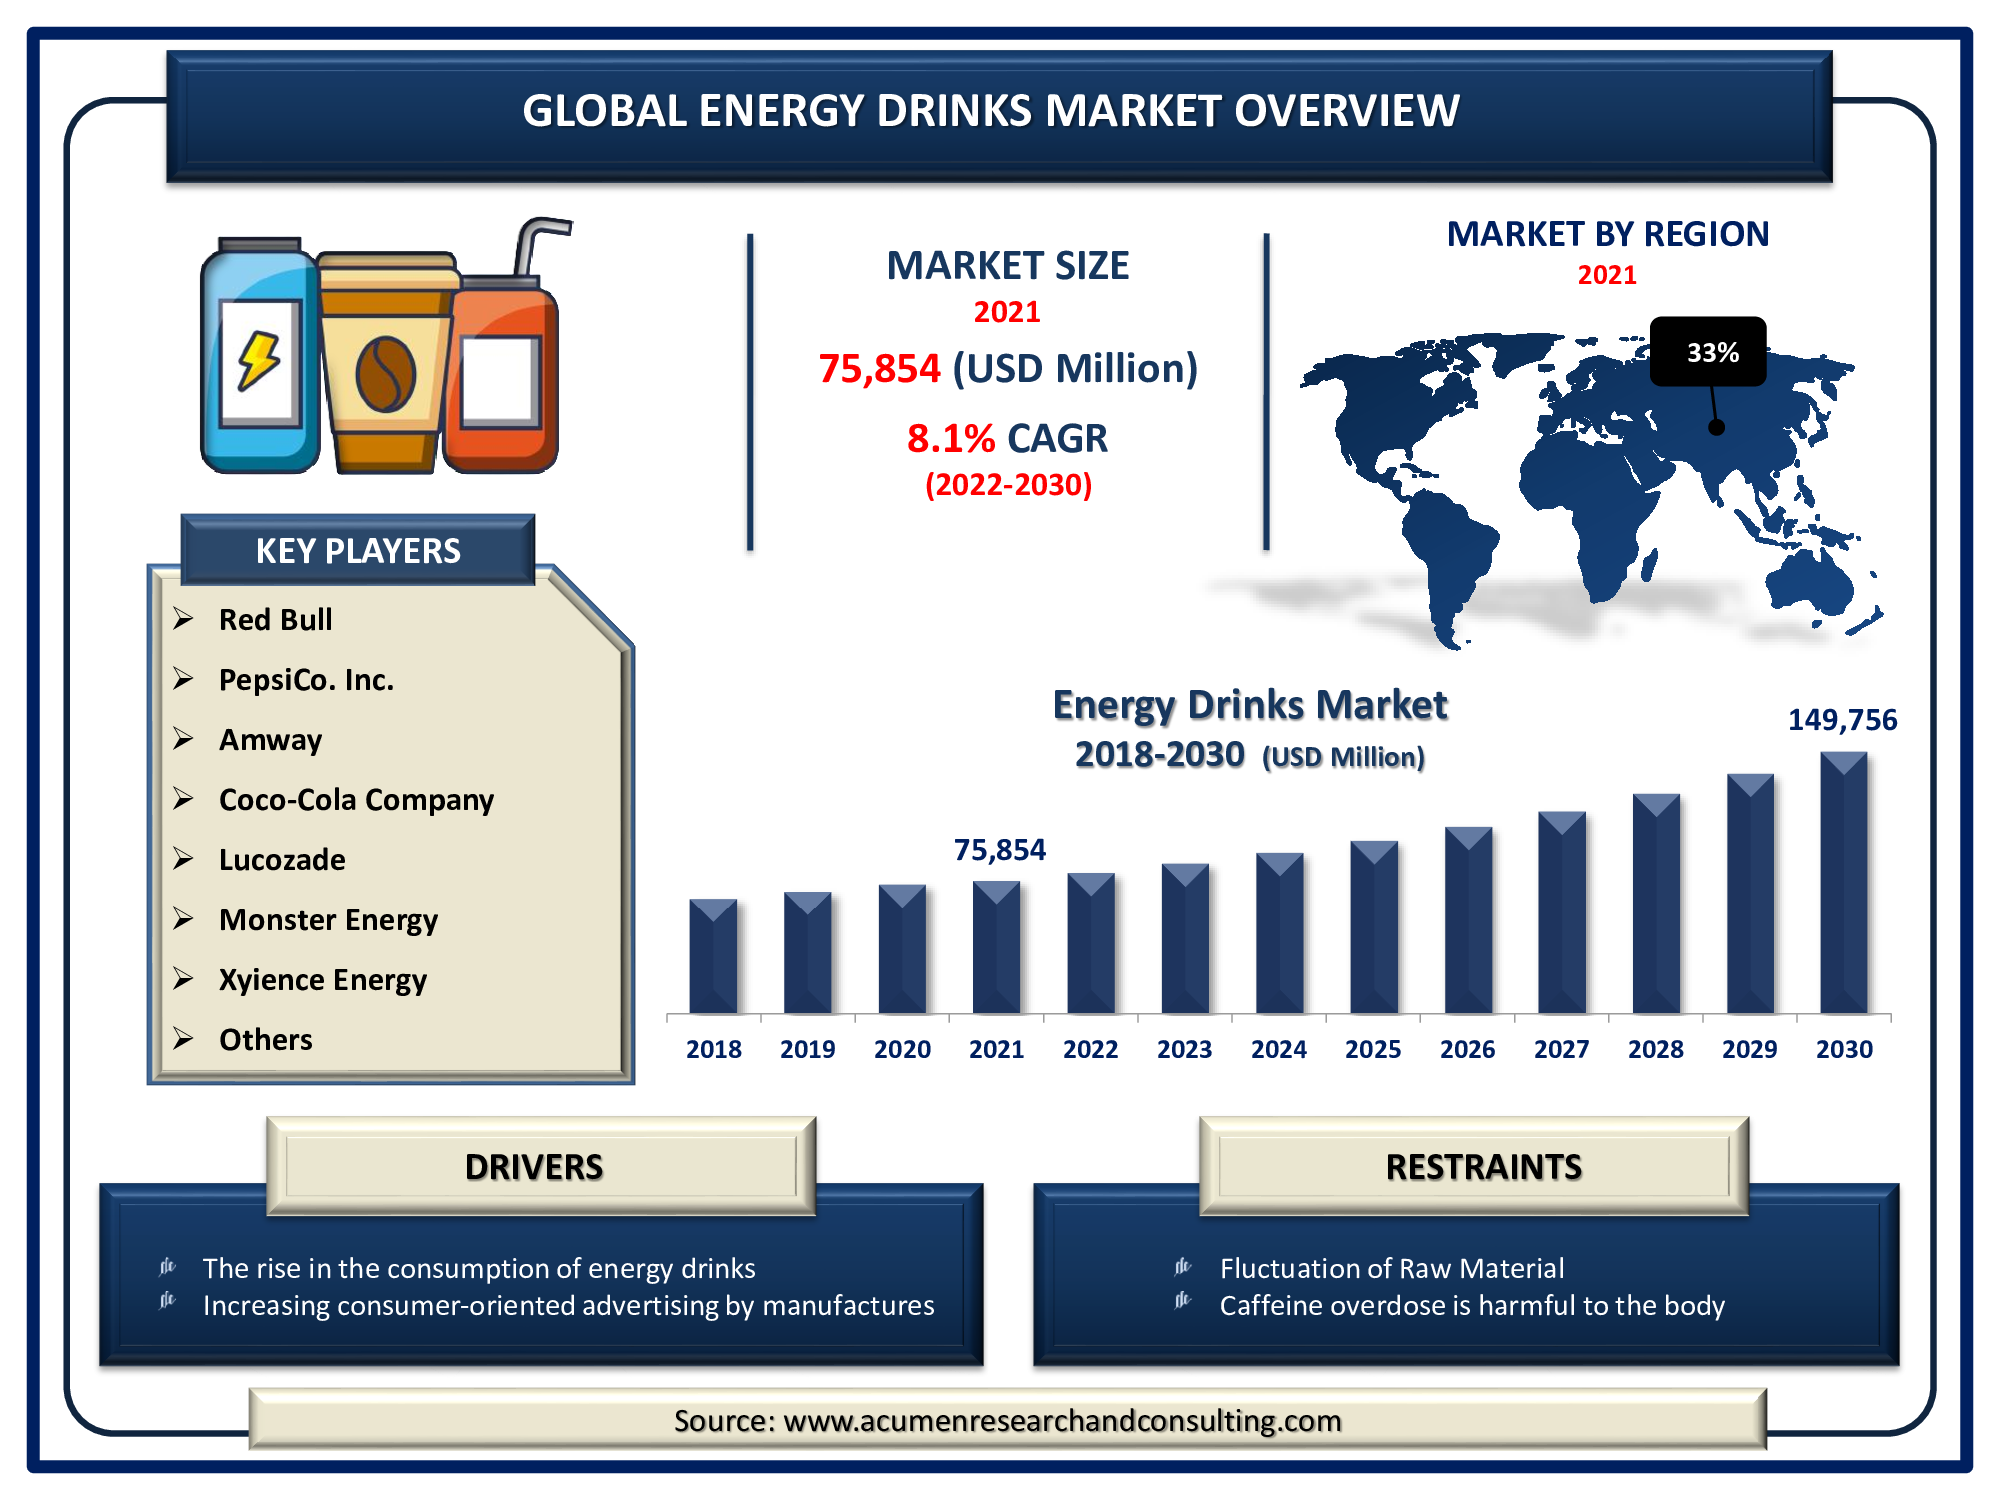 Energy Drinks Market Size was valued at USD 75,854 Million in 2021 and is predicted to be worth USD 149,756 Million by 2030, with a CAGR of 8.1% from 2022 to 2030.